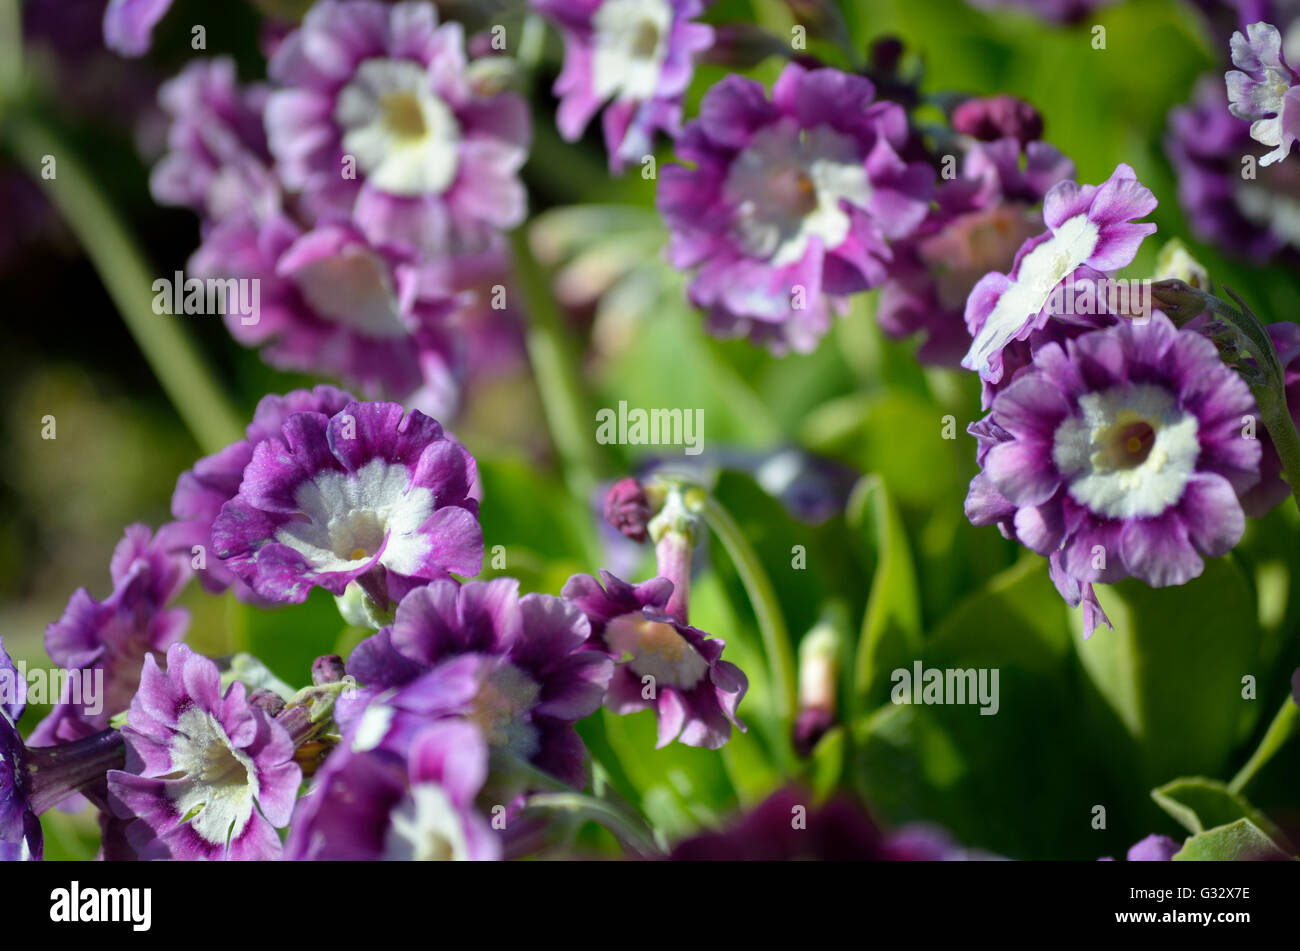 beautiful violet, yellow and purple primula x, pubescens flowers blooming in summer sunshine Stock Photo